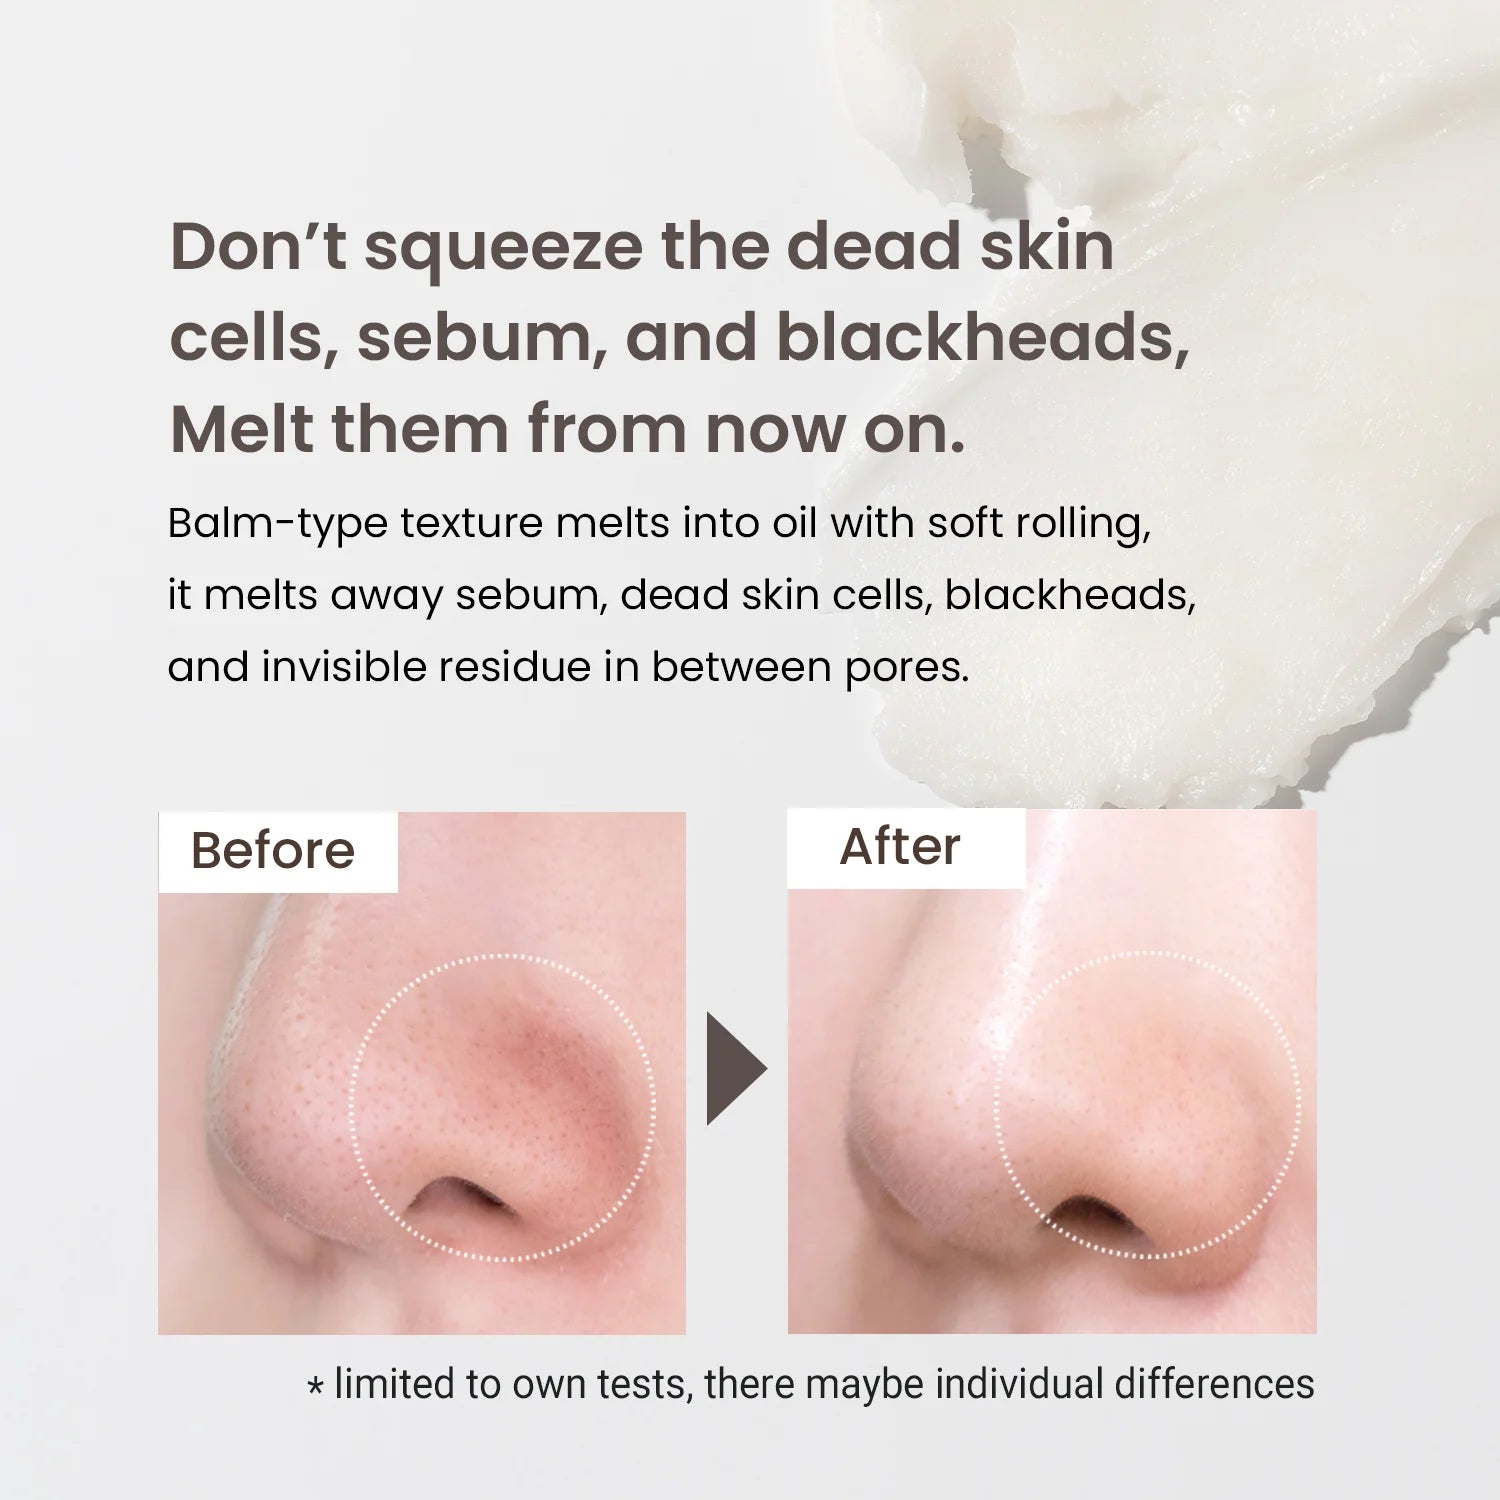 How to use All Clean Balm for double cleansing